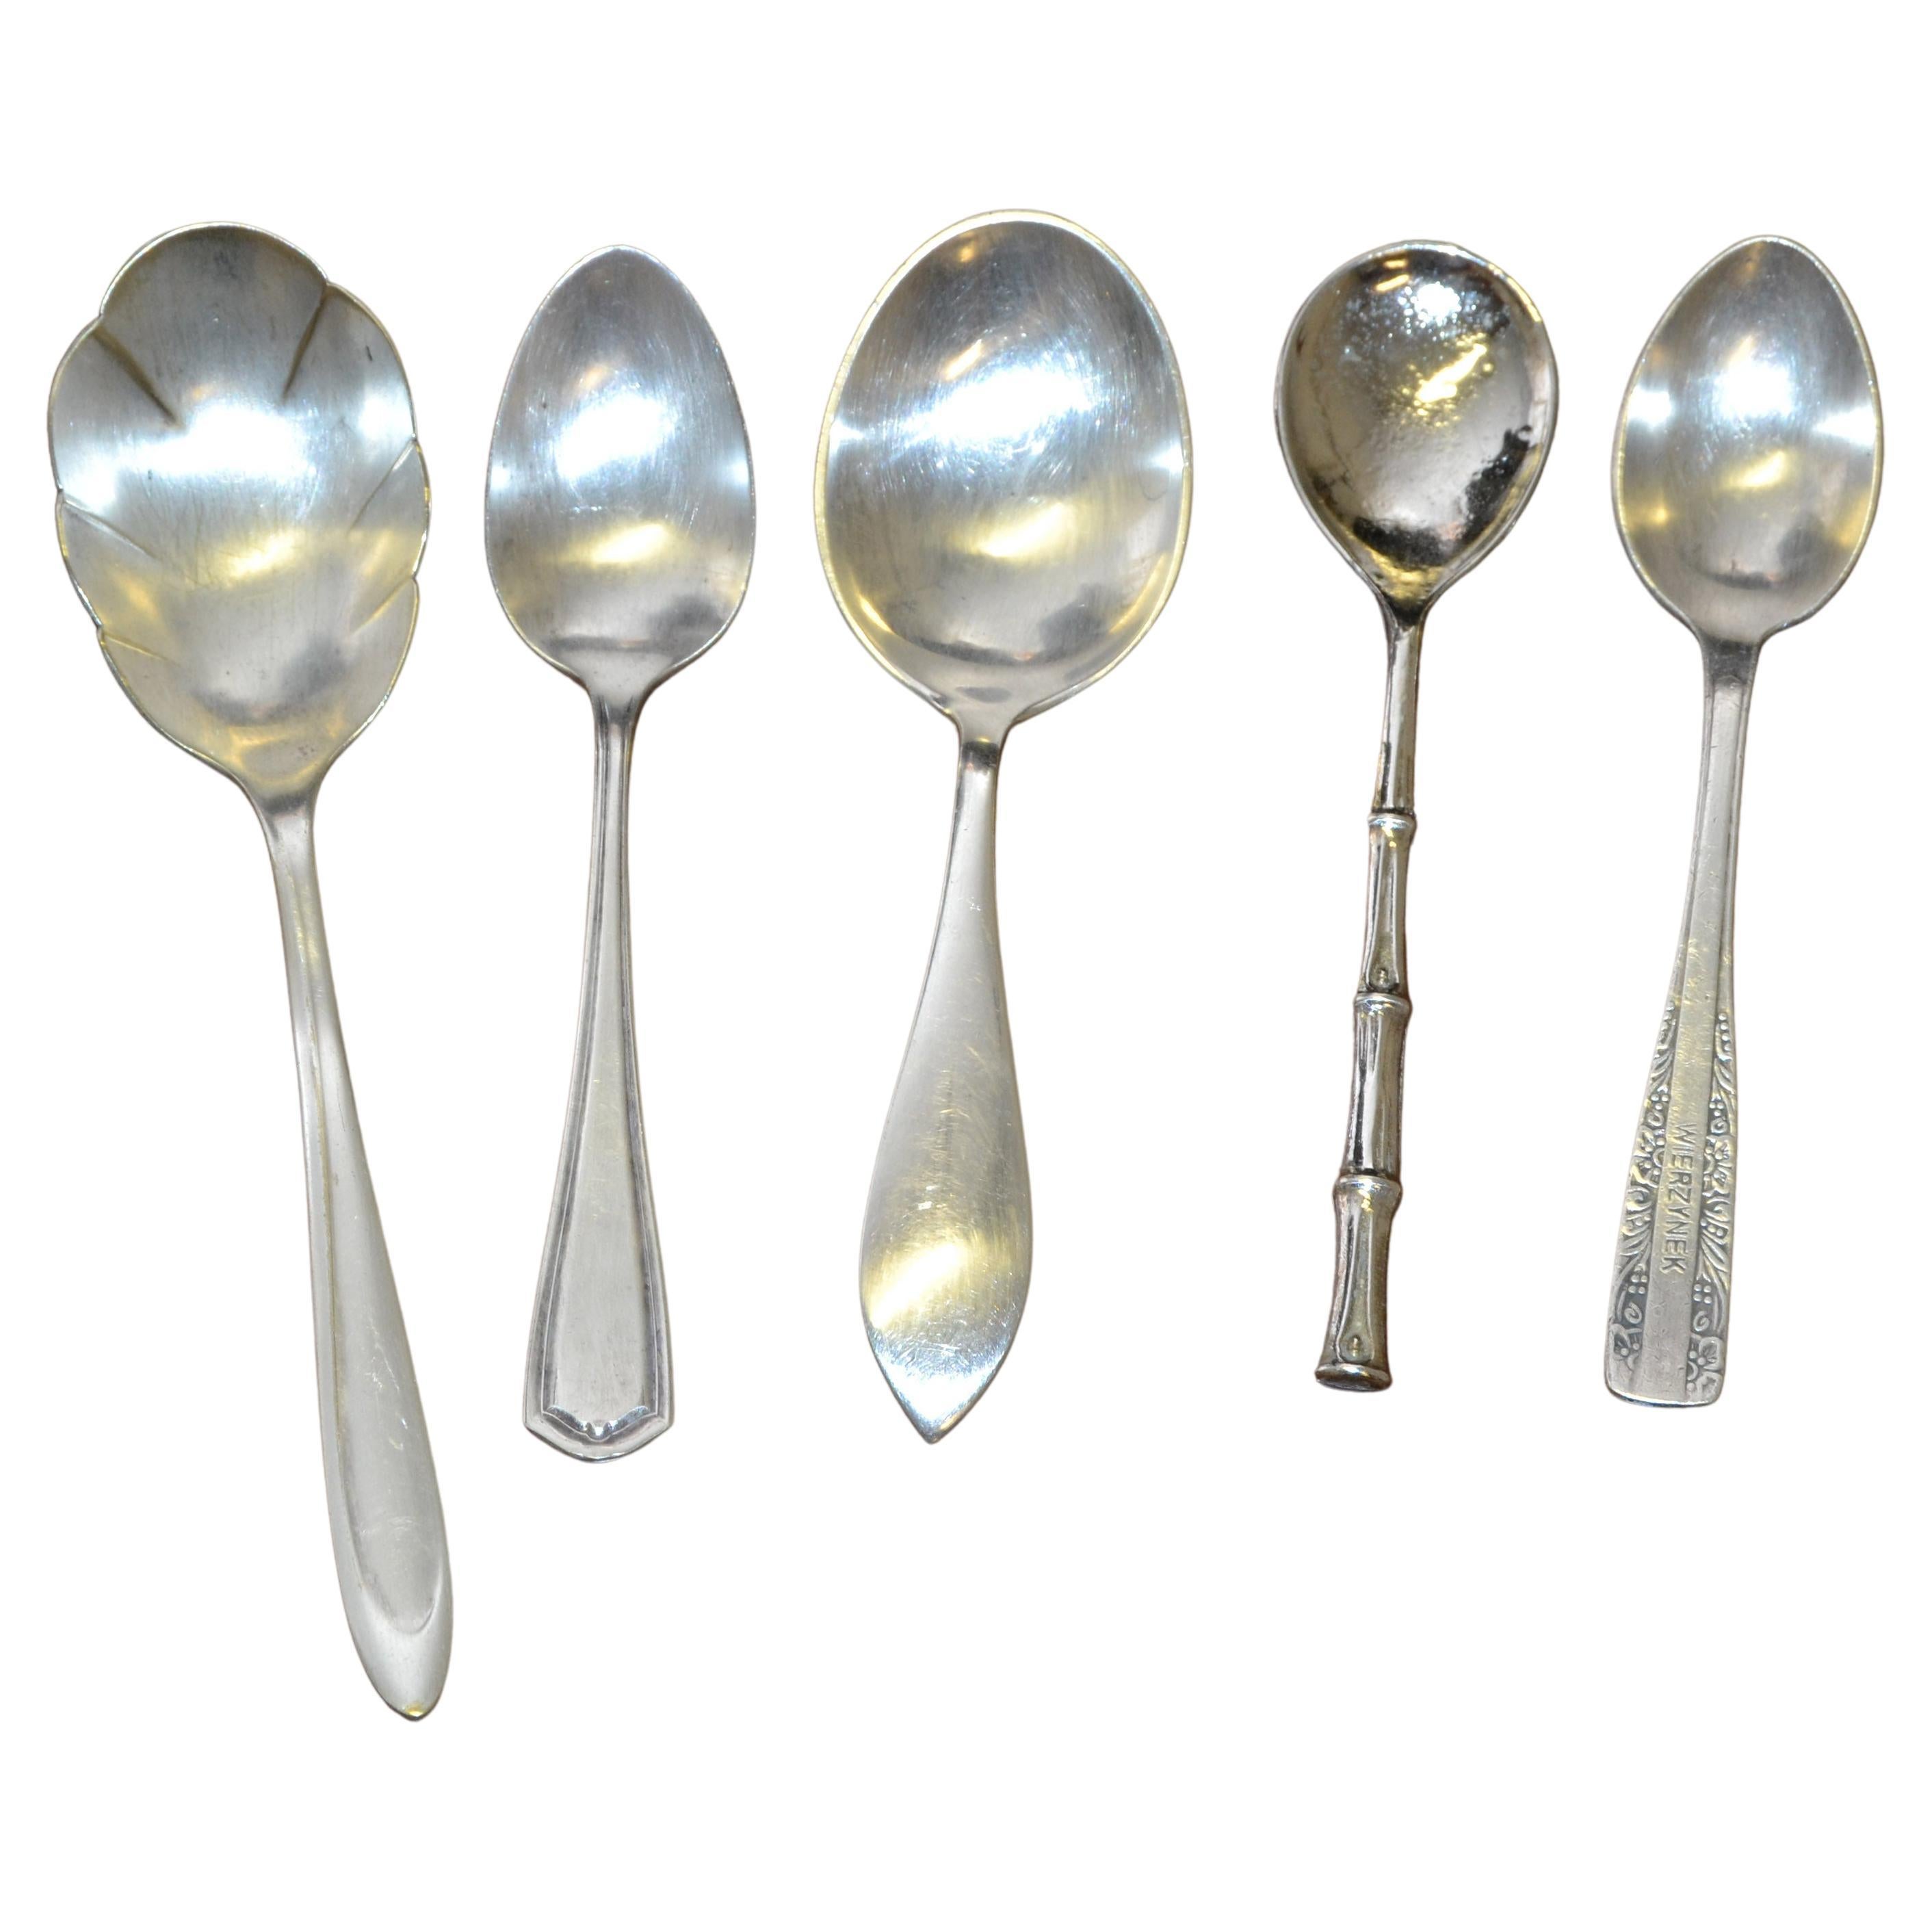 Europe and USA Collection 5 Tea Baby Spoons Marked Sterling Silver Plate Spoons For Sale